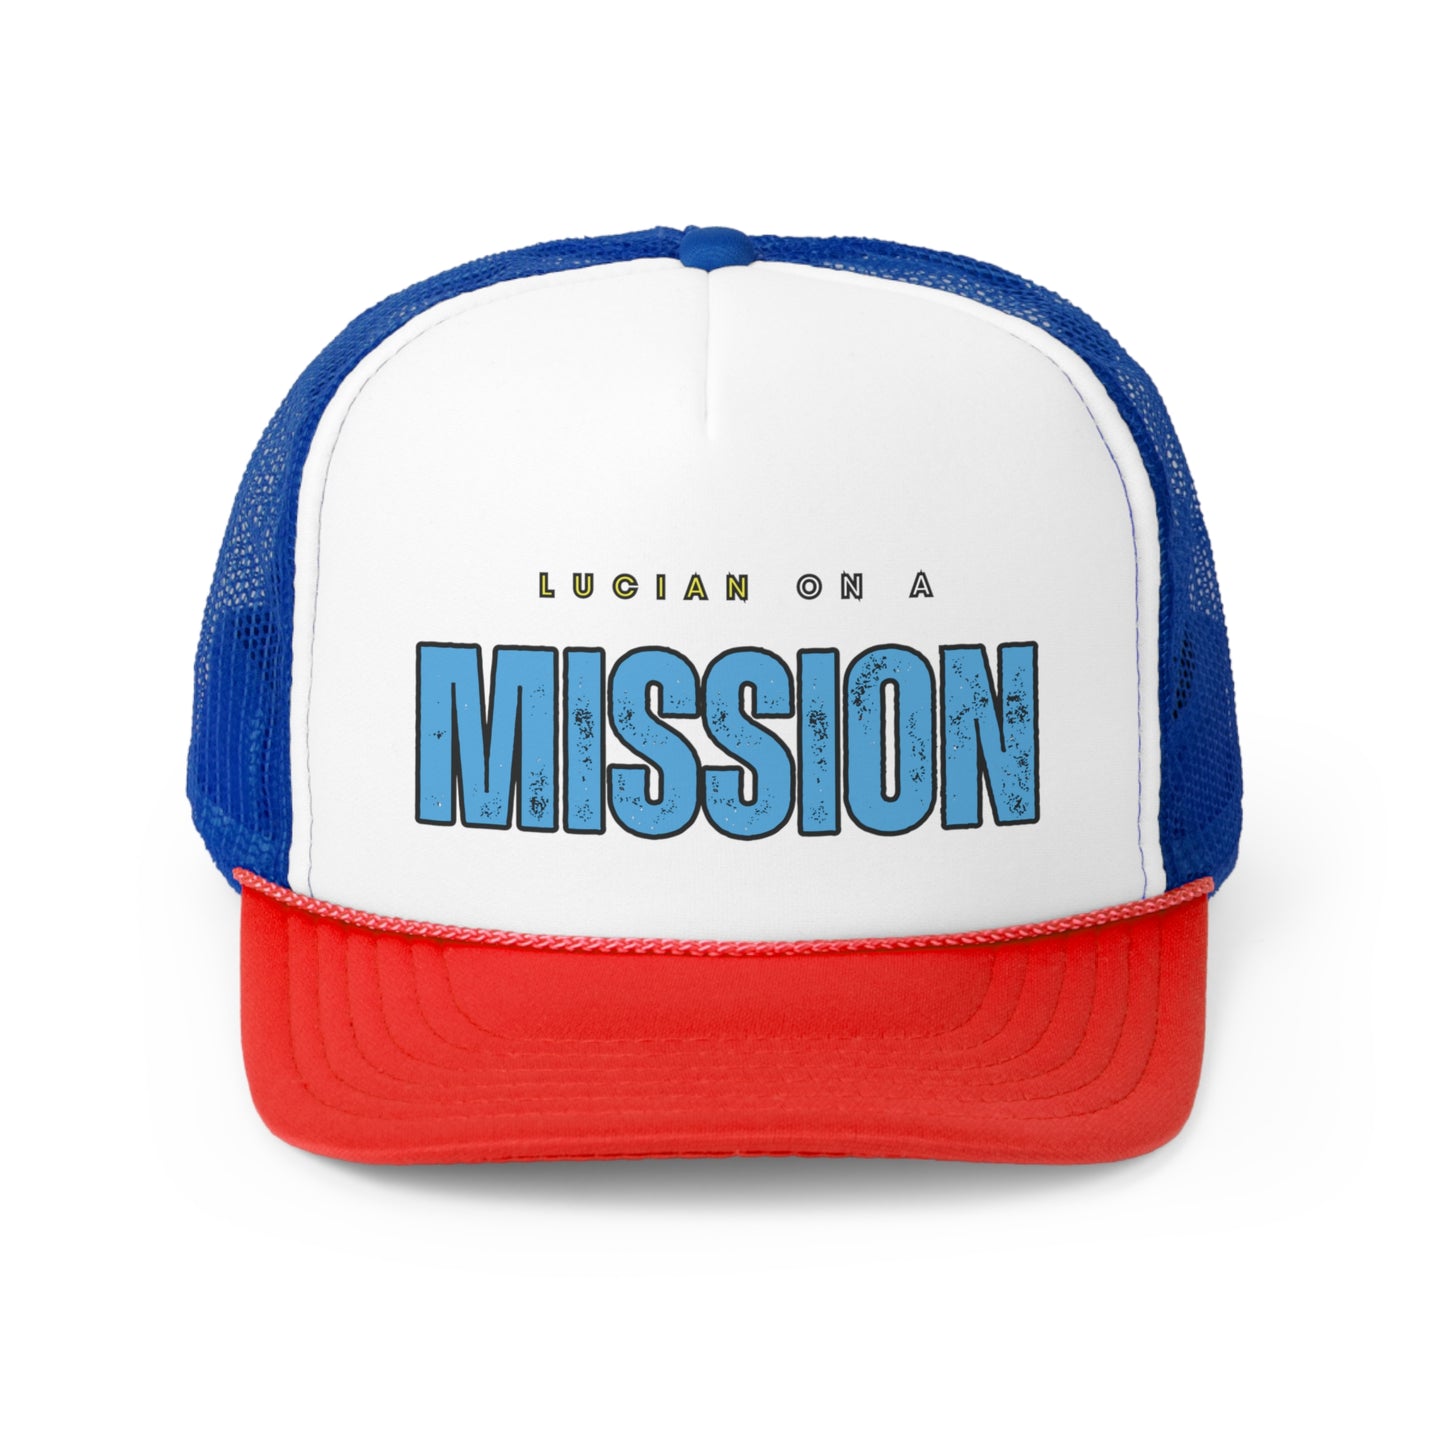 Lucian on a Mission Trucker Caps